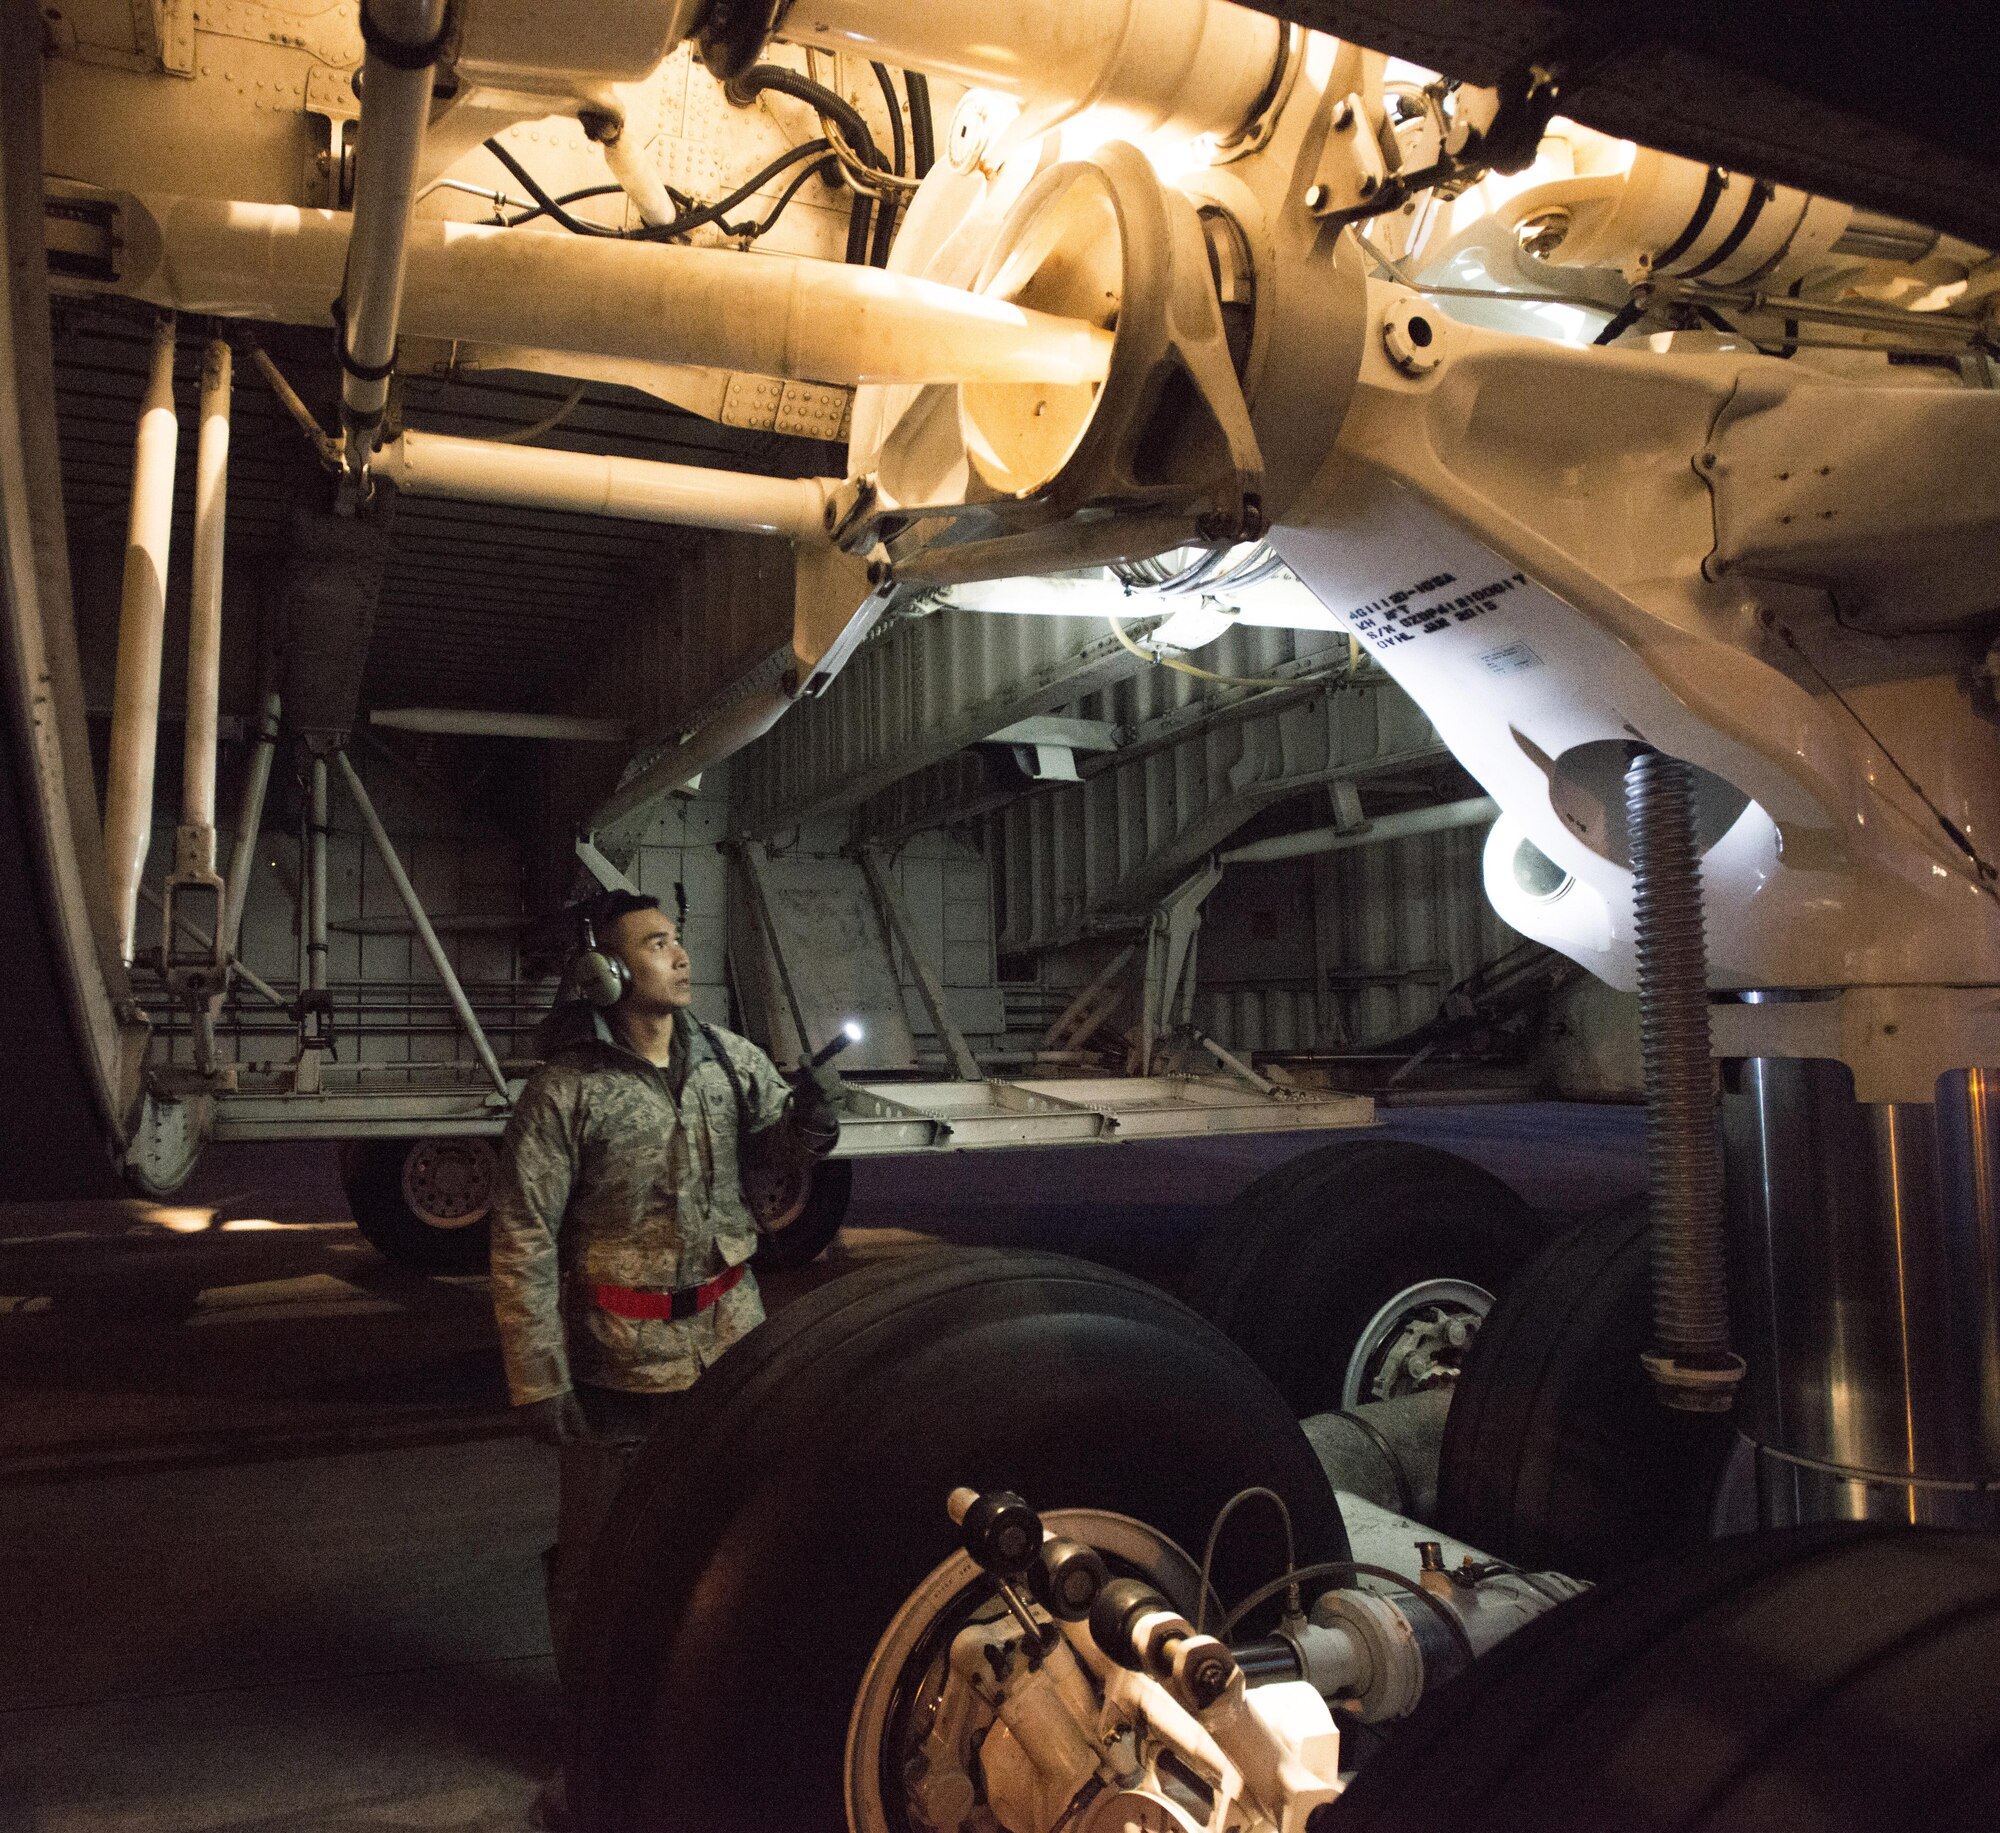 Staff Sgt. Piere Manivong, 22nd AS, completes a pre-flight inspection of a C-5M Super Galaxy landing gear prior to a flight March 7, 2017 from Yokota Air Base, Japan, to Osan Air Base, South Korea. As a flight engineer, Manivong is responsible for completing pre-flight inspections of the aircraft prior to the pilots coming on board to ensure everything is safe for the flight. (U.S. Air Force photo by Staff Sgt. Nicole Leidholm)